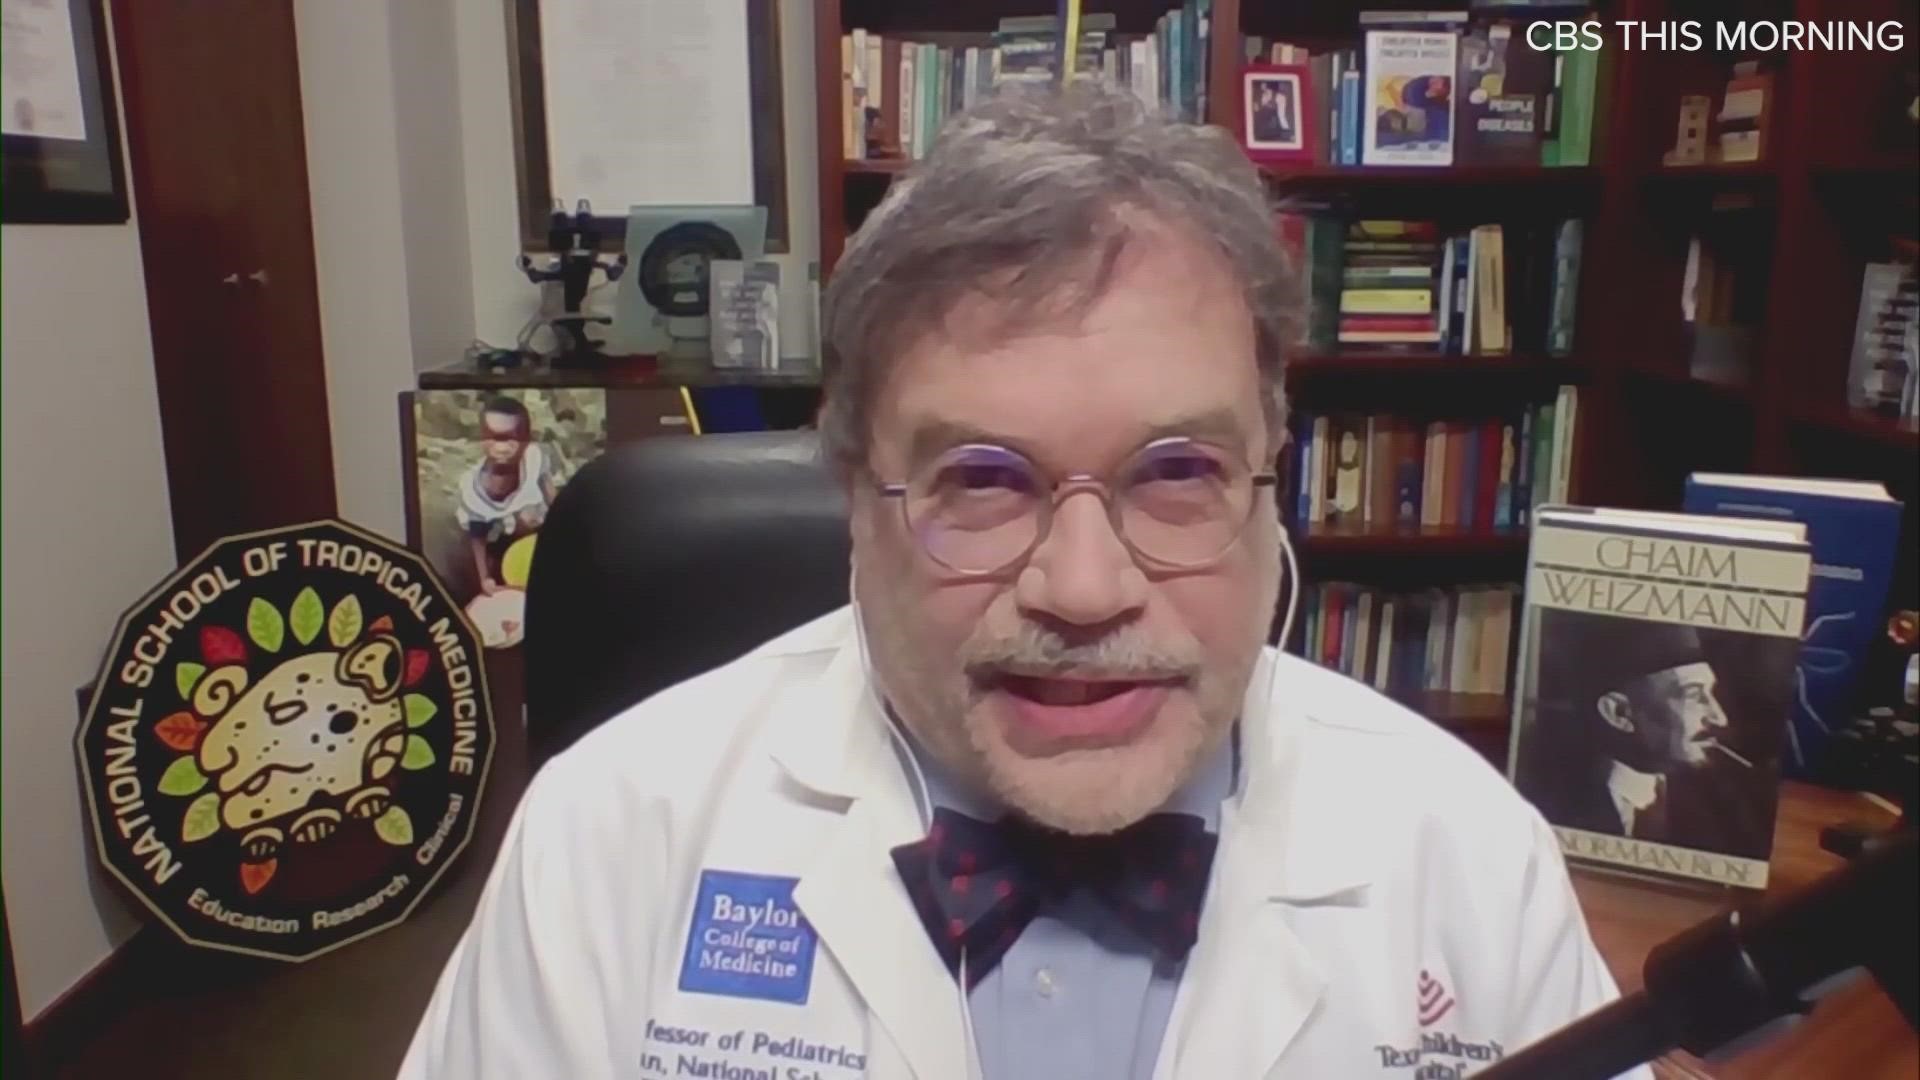 In an interview on CBS This morning, Dr. Hotez talked about cases on the rise and his concern with crowds.